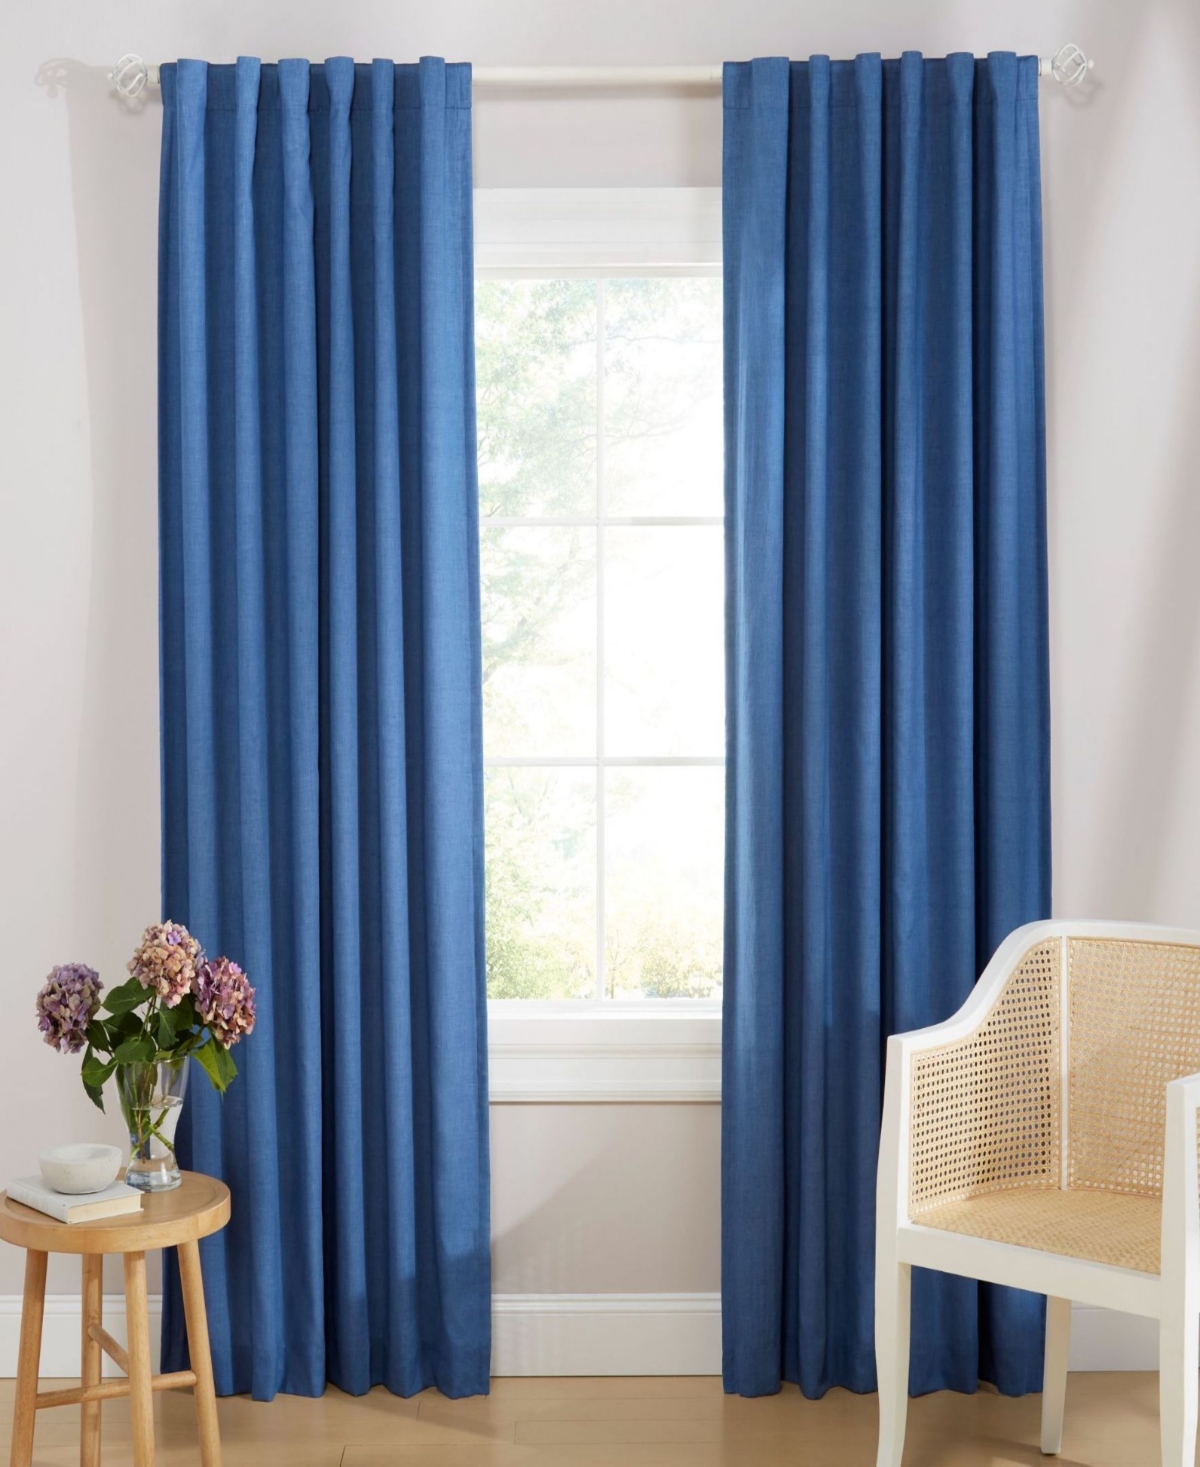 Lauren Ralph Lauren Tyler 100% Blackout Cotton Blend With Lining Back Tab And Rod Pocket Curtain Panel, 50" X 84" In Slate Blue